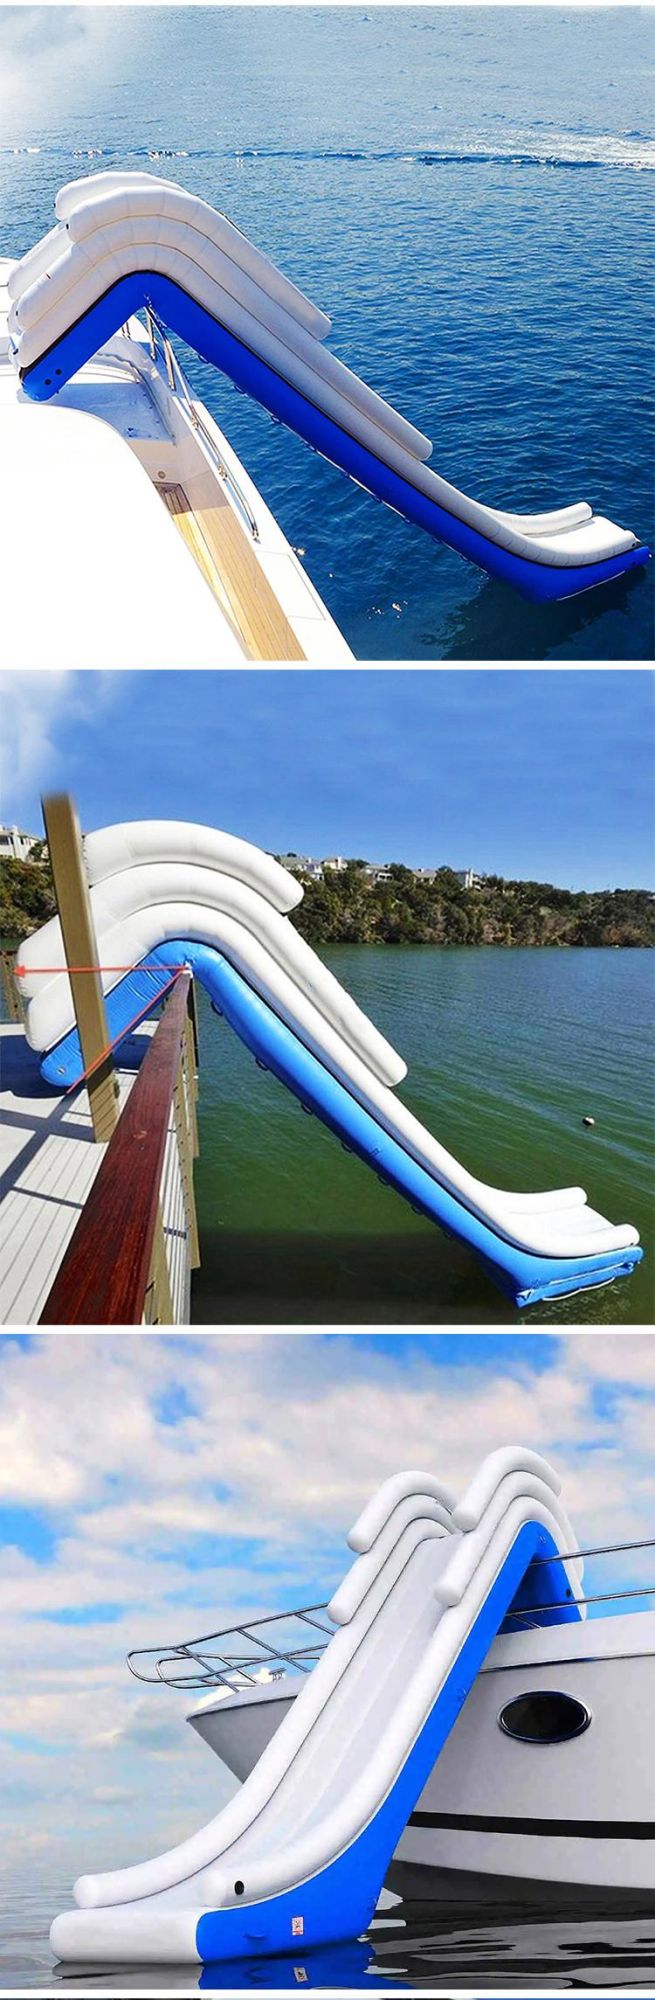 Water Slide Inflatable Yacht Slide for Boat Outdoor Marine Games